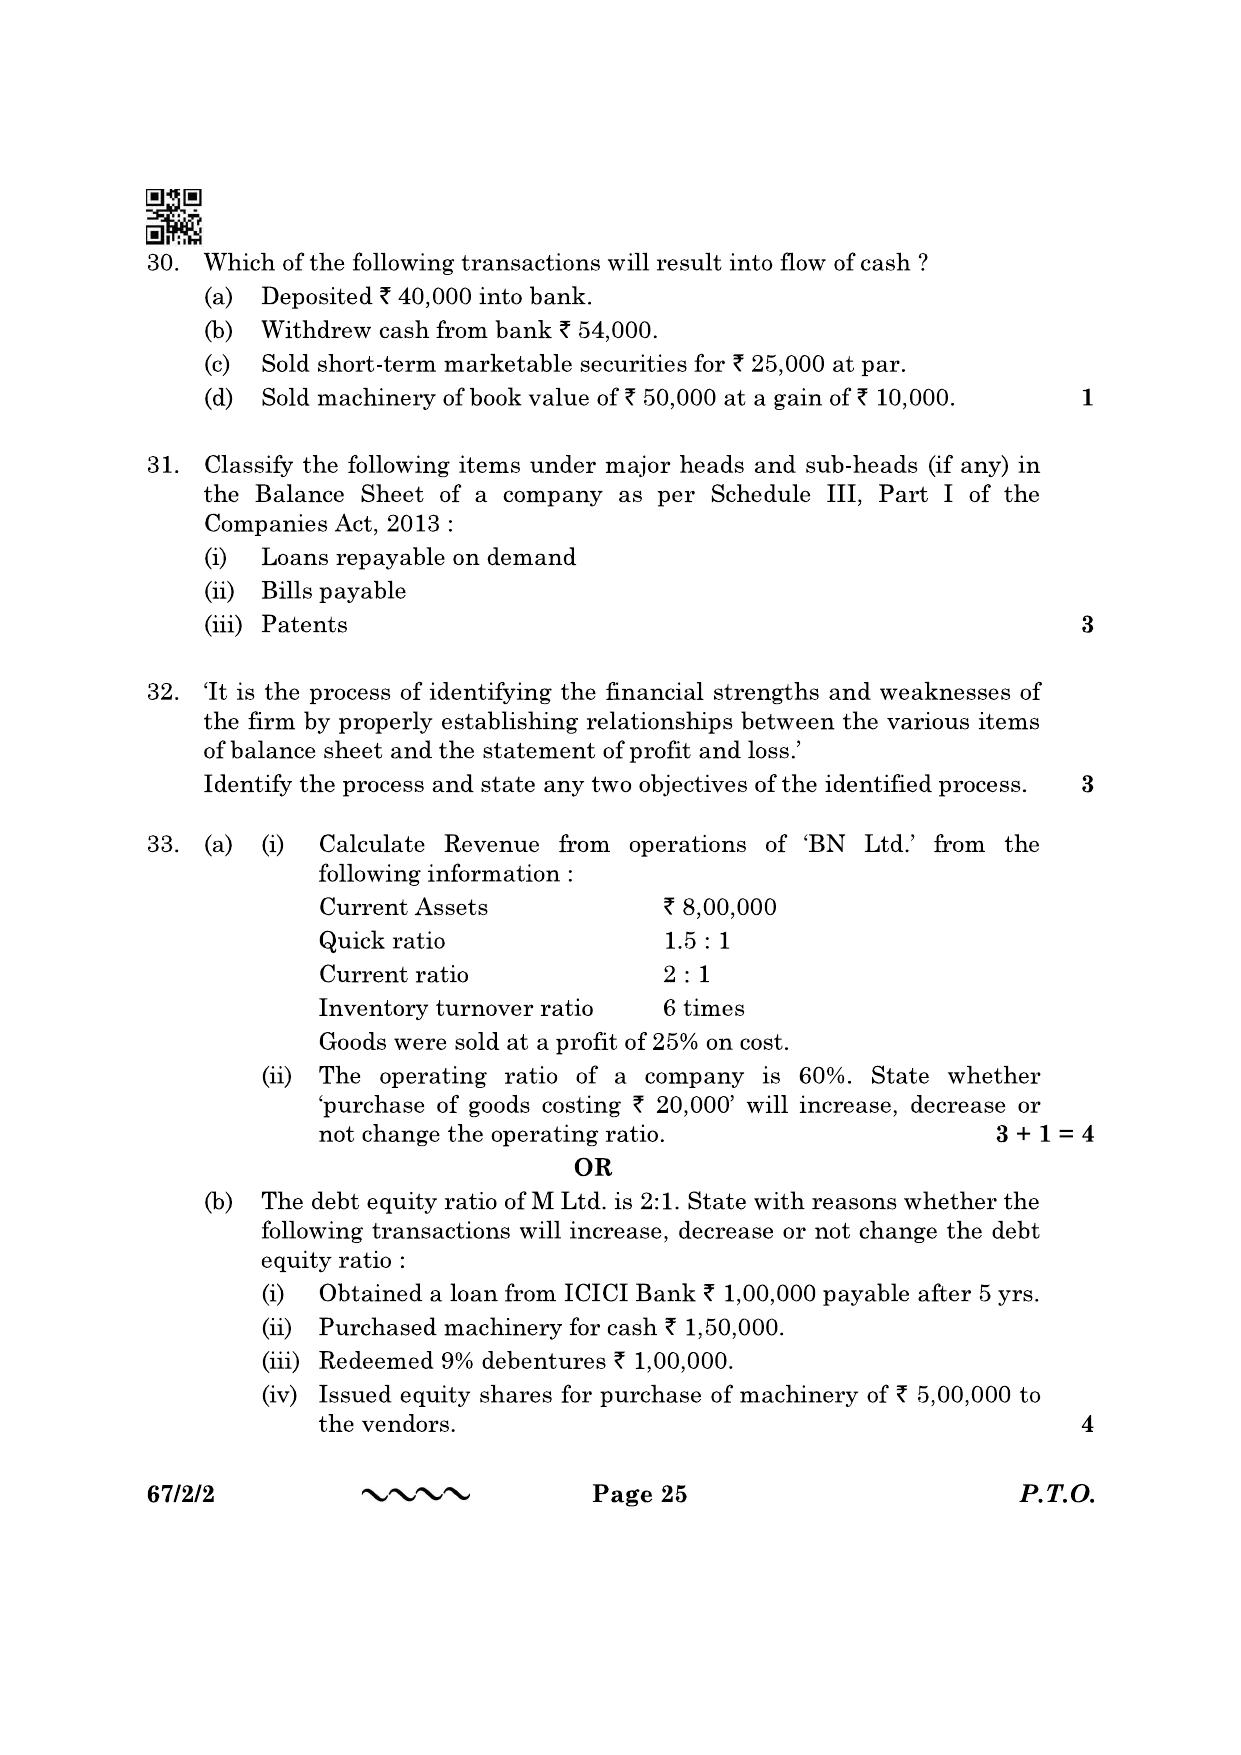 CBSE Class 12 67-2-2 Accountancy 2023 Question Paper - Page 25